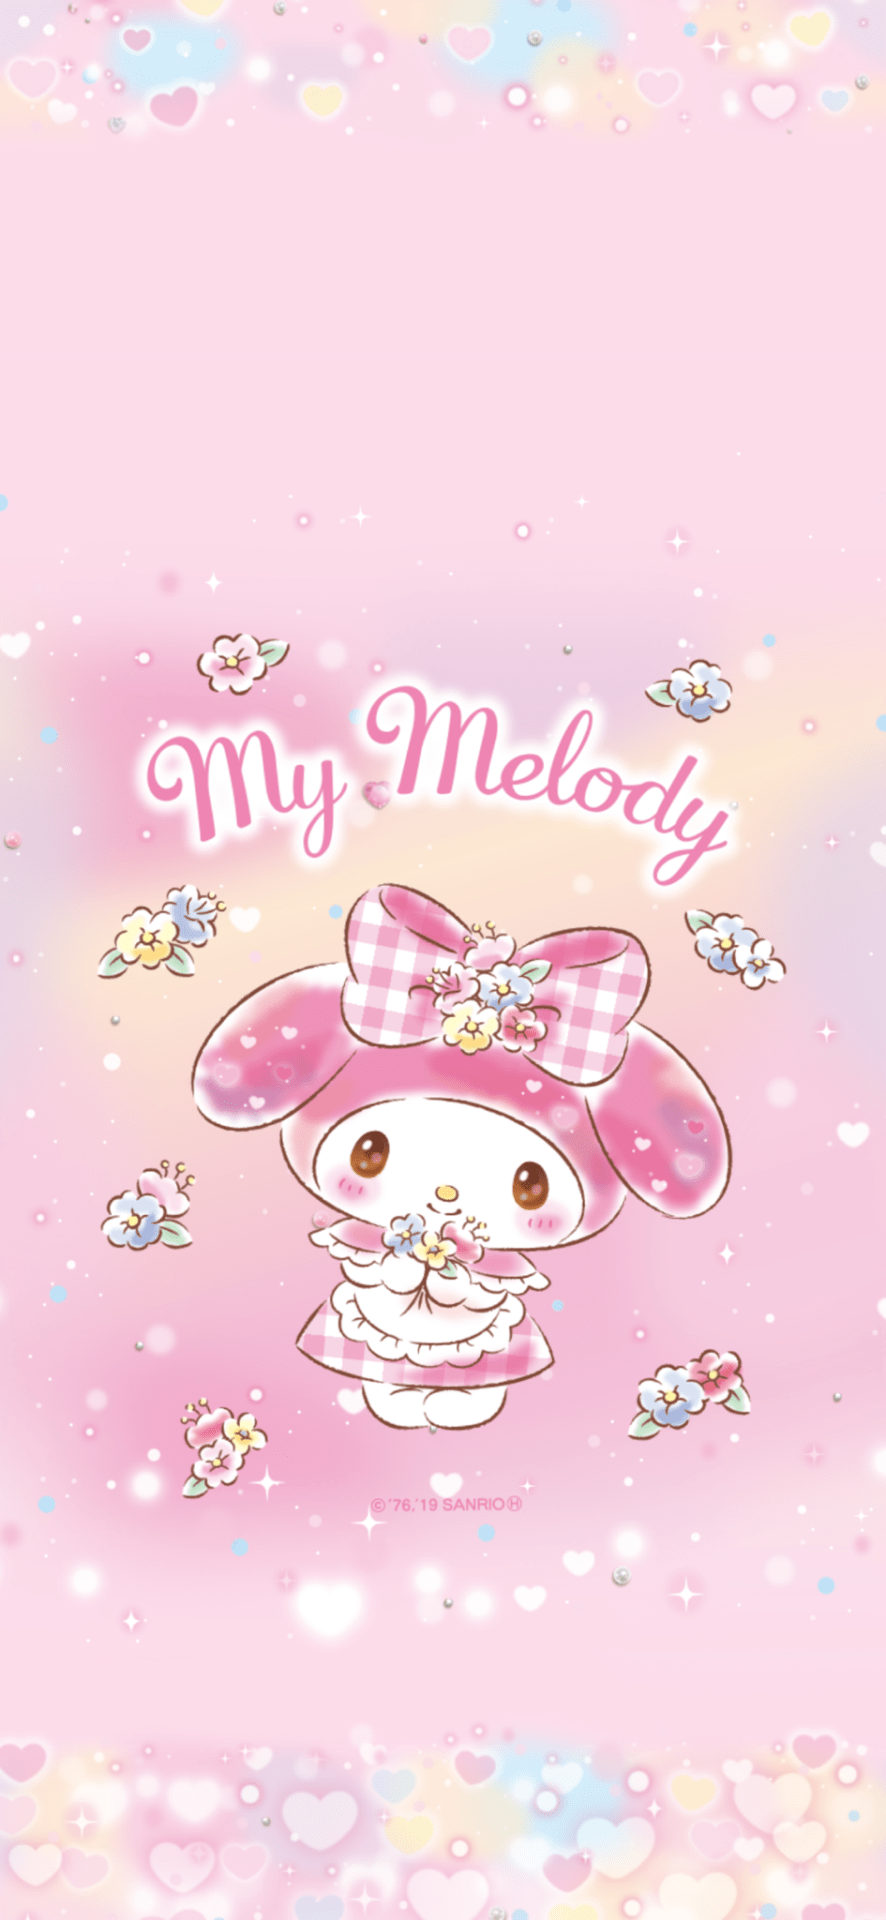 Sanrio on X New month new adorable MyMelody phone backgrounds   Download your favorite wallpaper here httpstcoae81wJa9m2   httpstcoviqlP0lng5  X